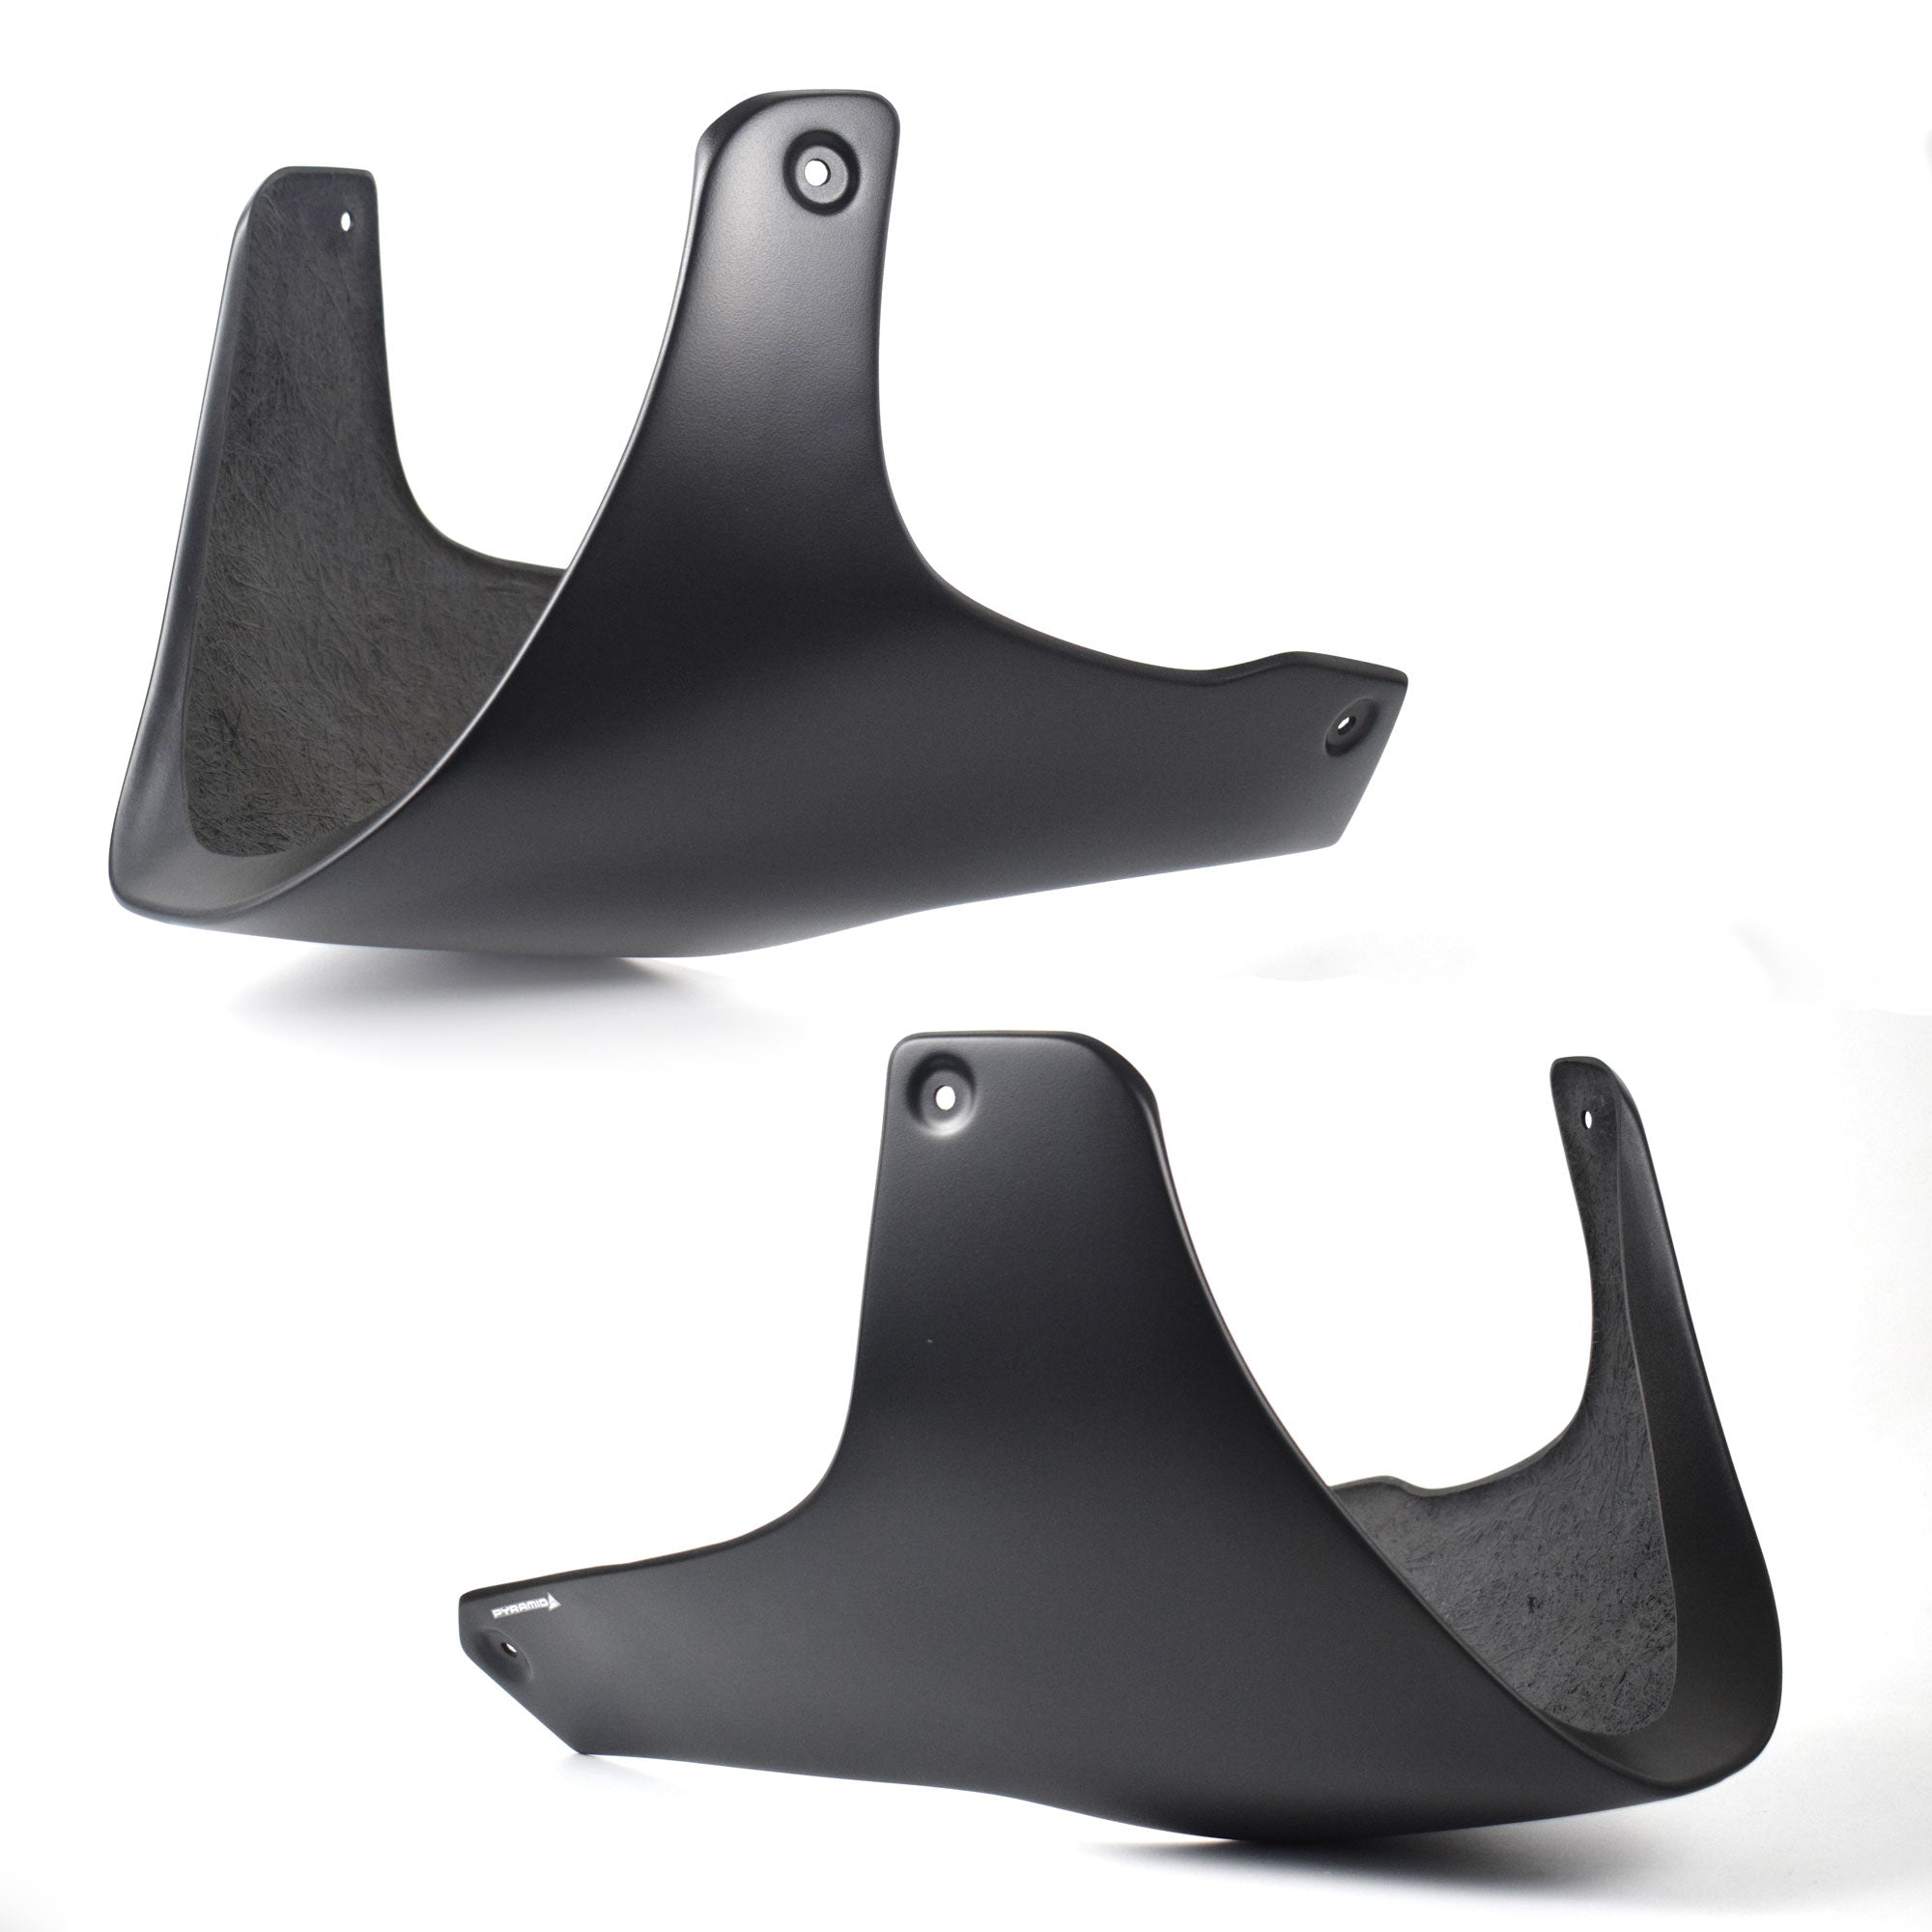 Pyramid Belly Pan | Matte Black | Kawasaki Z 900 RS 2019>Current-23905M-Belly Pans-Pyramid Motorcycle Accessories